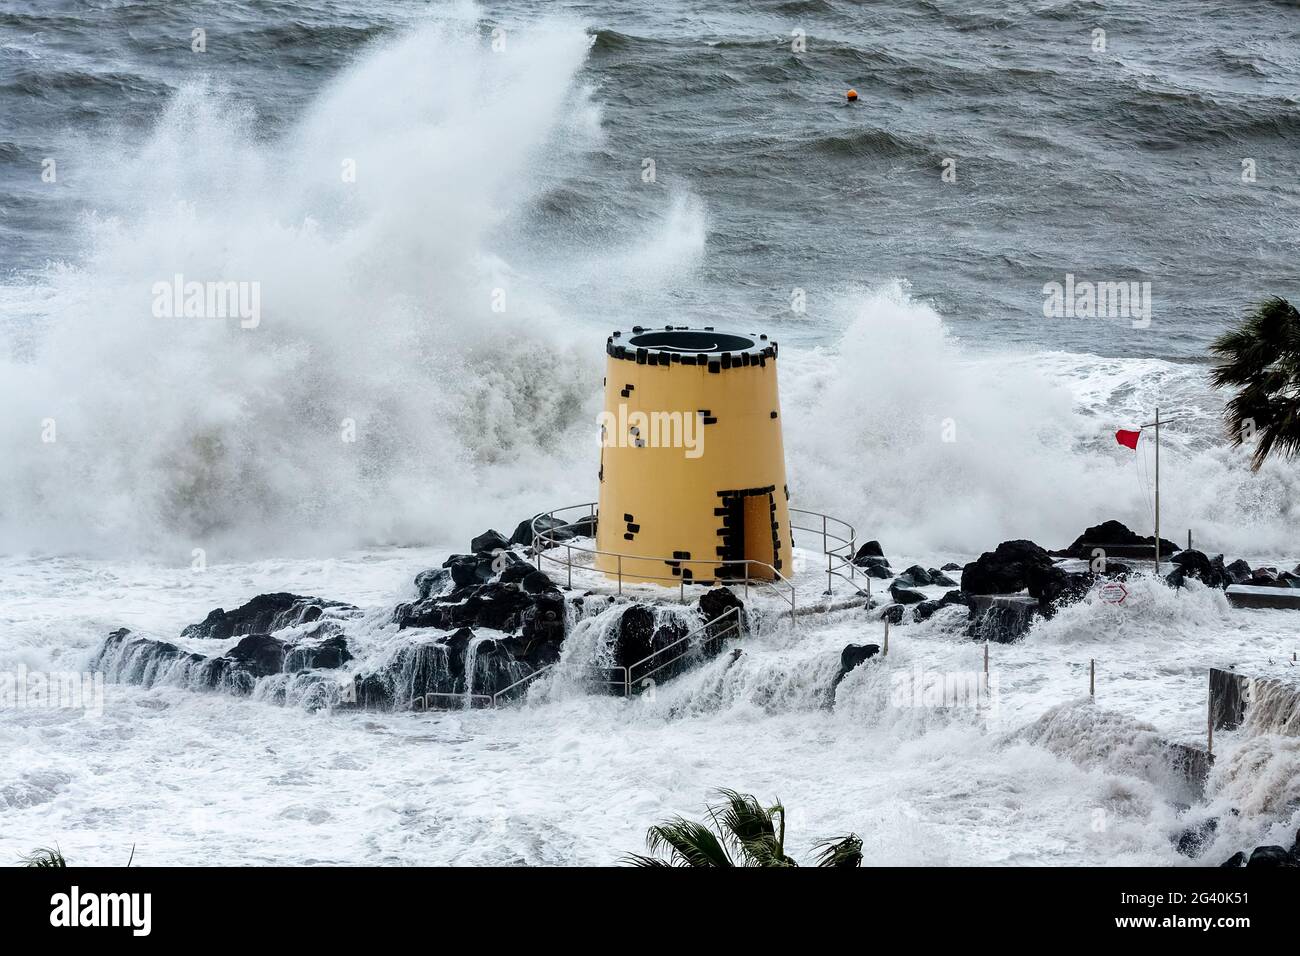 FUNCHAL, MADEIRA/PORTUGAL - APRIL 9 : Tropical storm hitting the lookout tower in the grounds of the Savoy Hotel Funchal Madeira Stock Photo